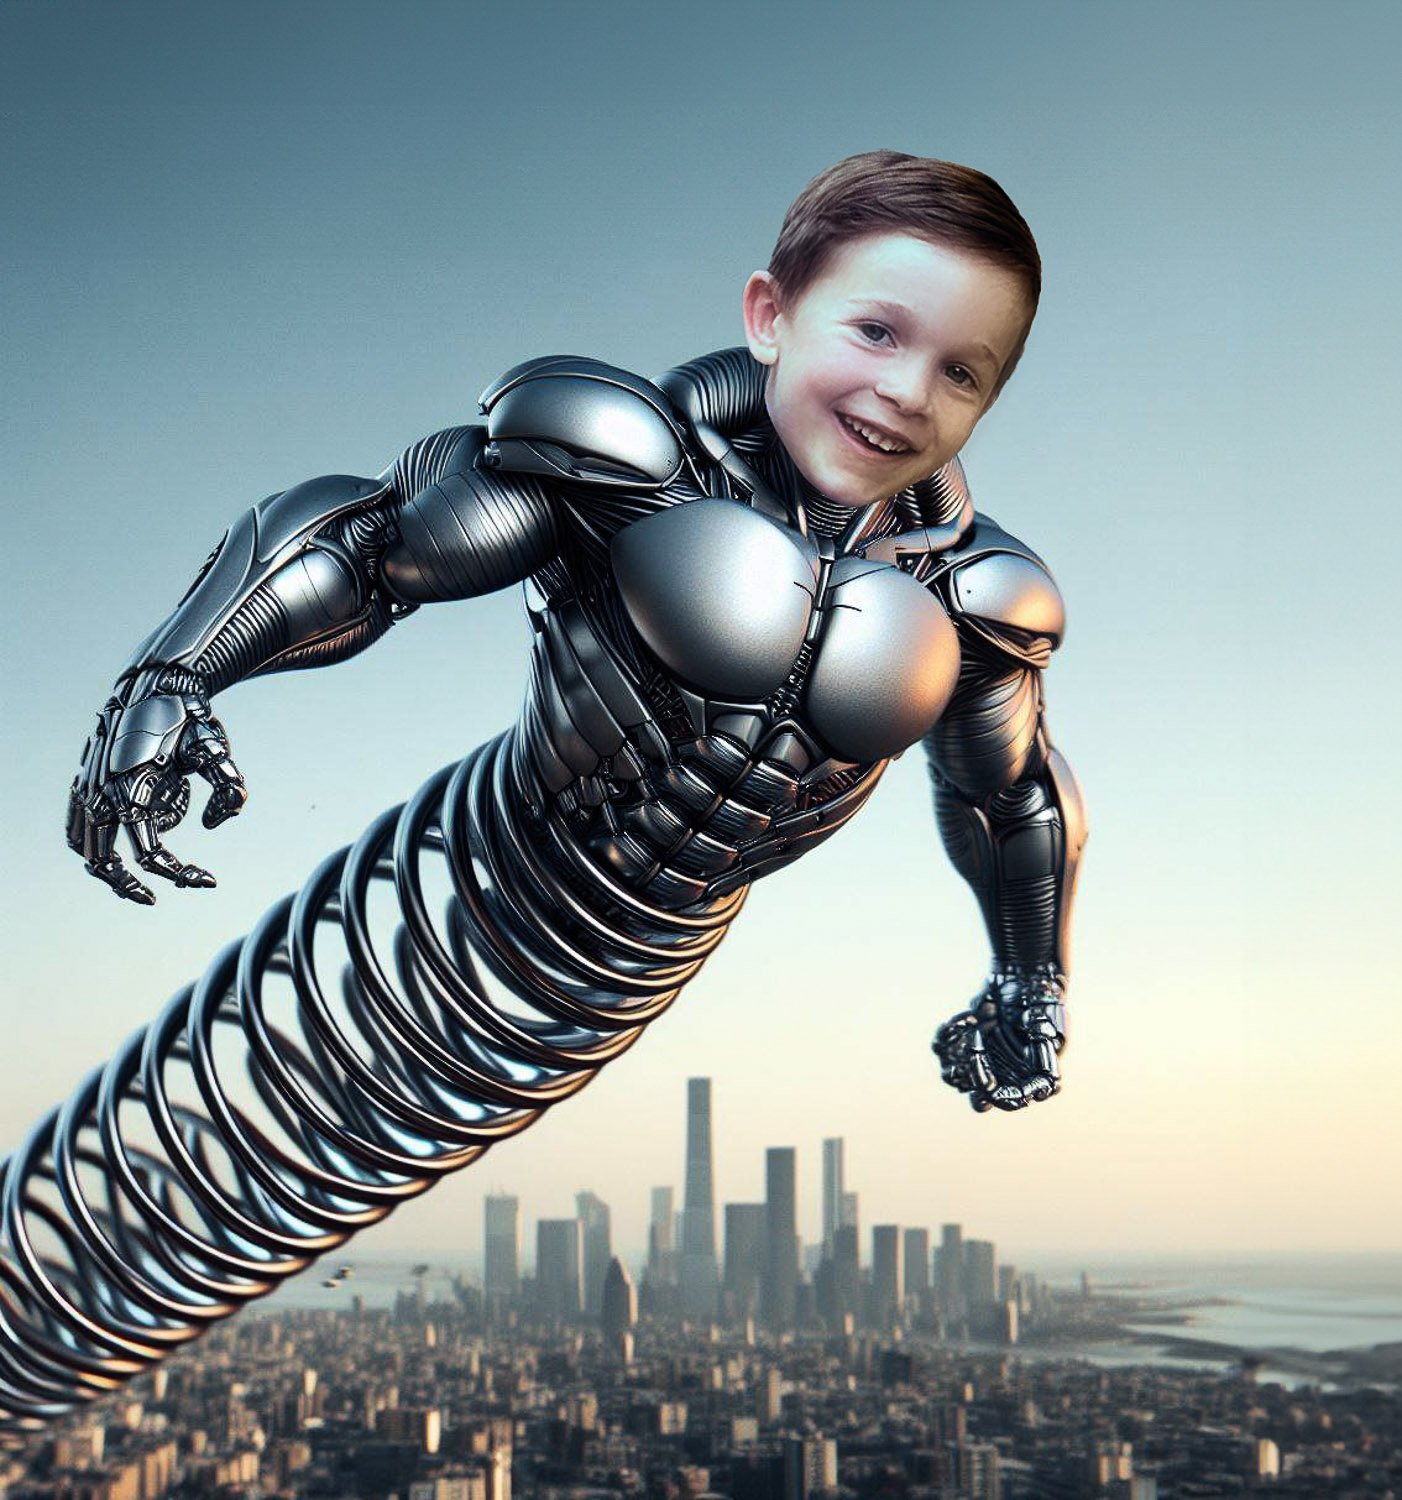 A young boy with a steel spring body high in city skyline